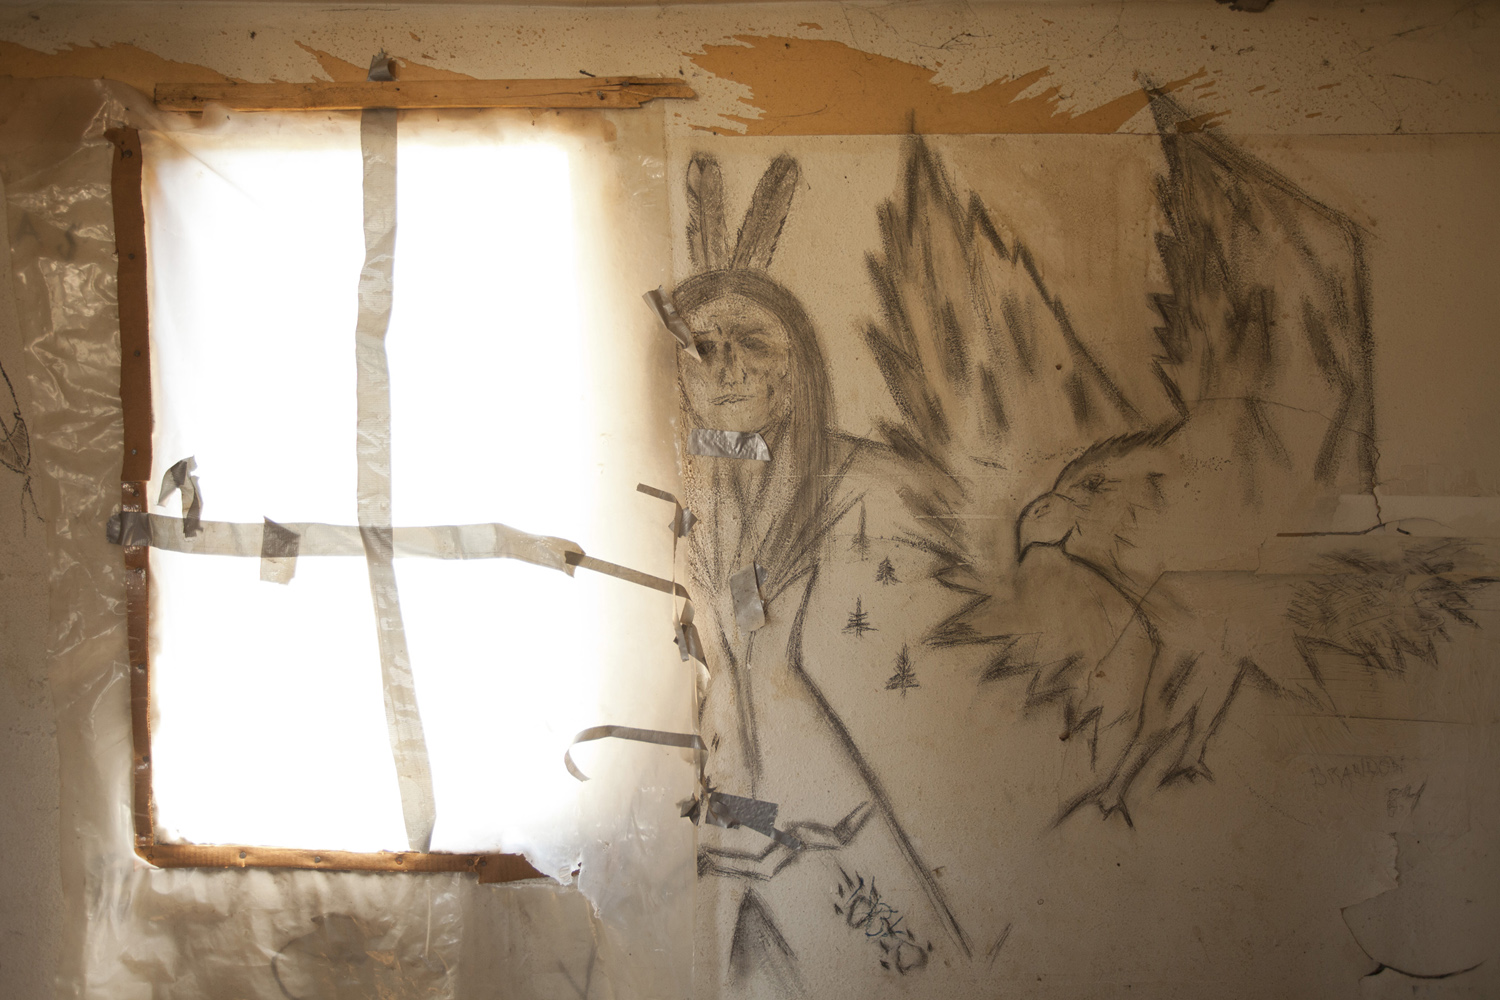 Drawings on the wall of a home in Pine Ridge, SD.